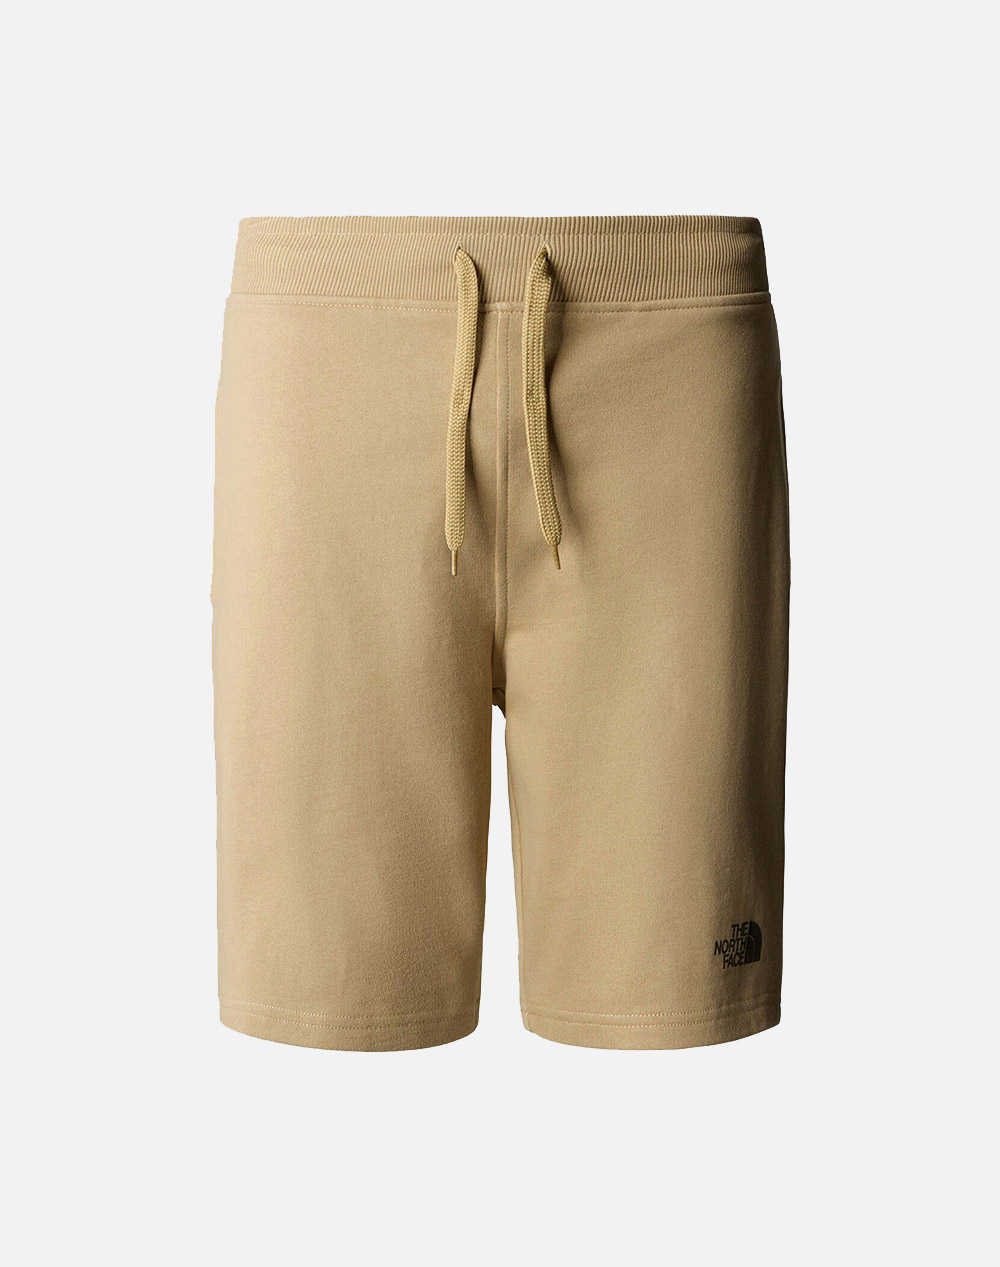 THE NORTH FACE M STAND SHORT LIGHT TNF NF0A3S4E-NFLK5 Biege 3820ATNFA2300003_XR23040